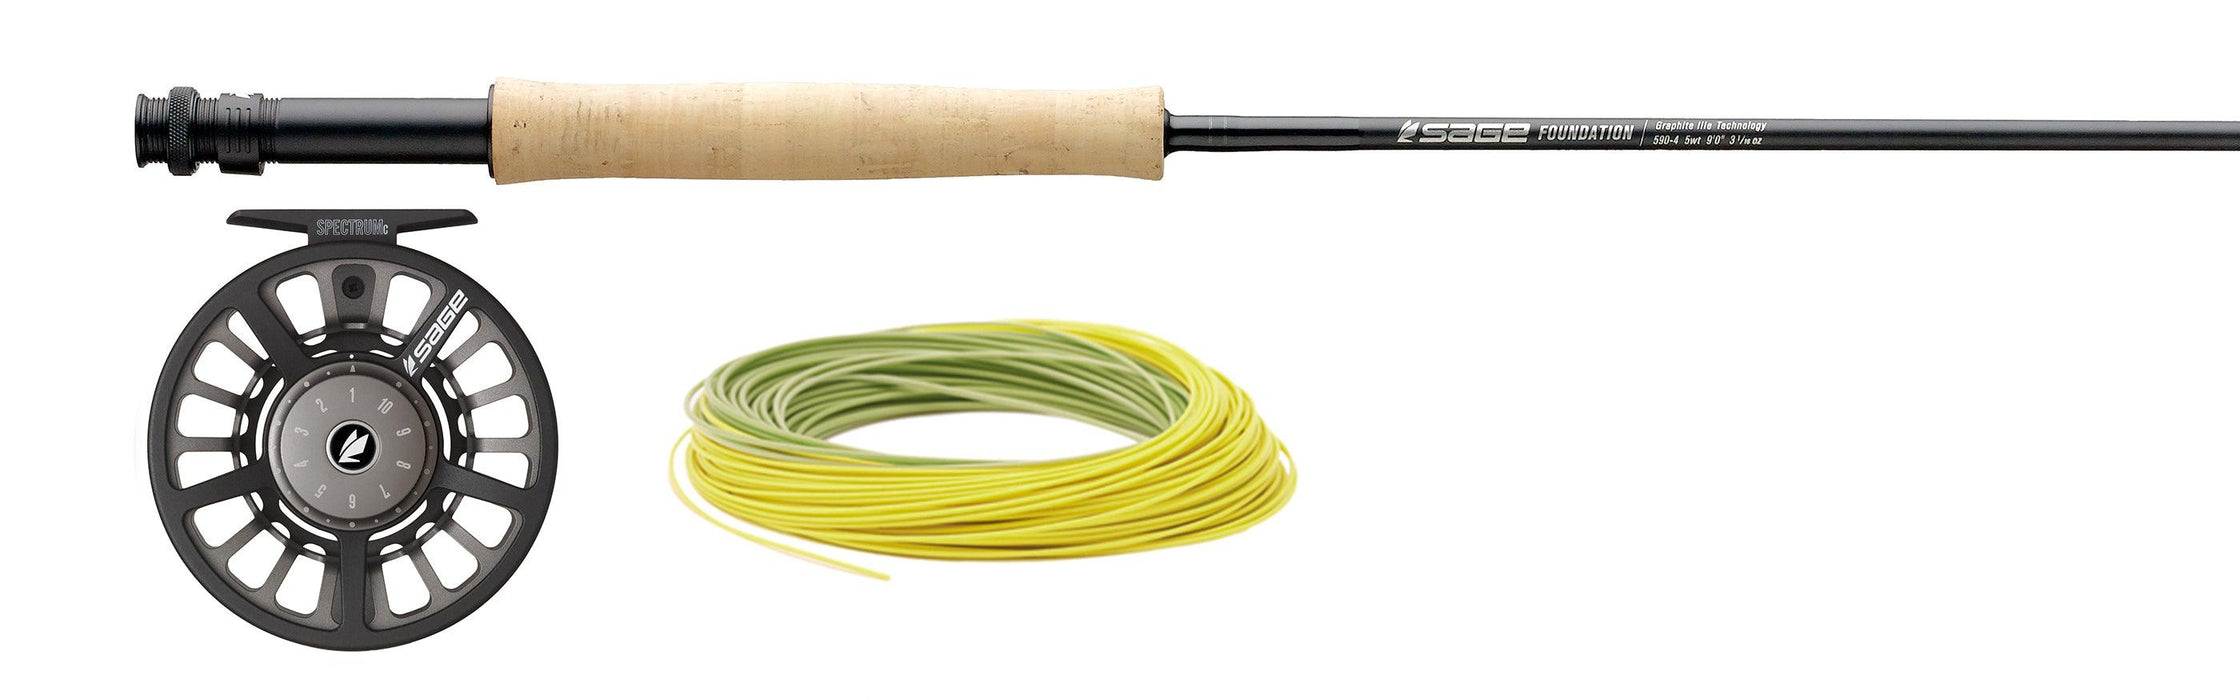 Sage foundation fly rod at a maine fly shop